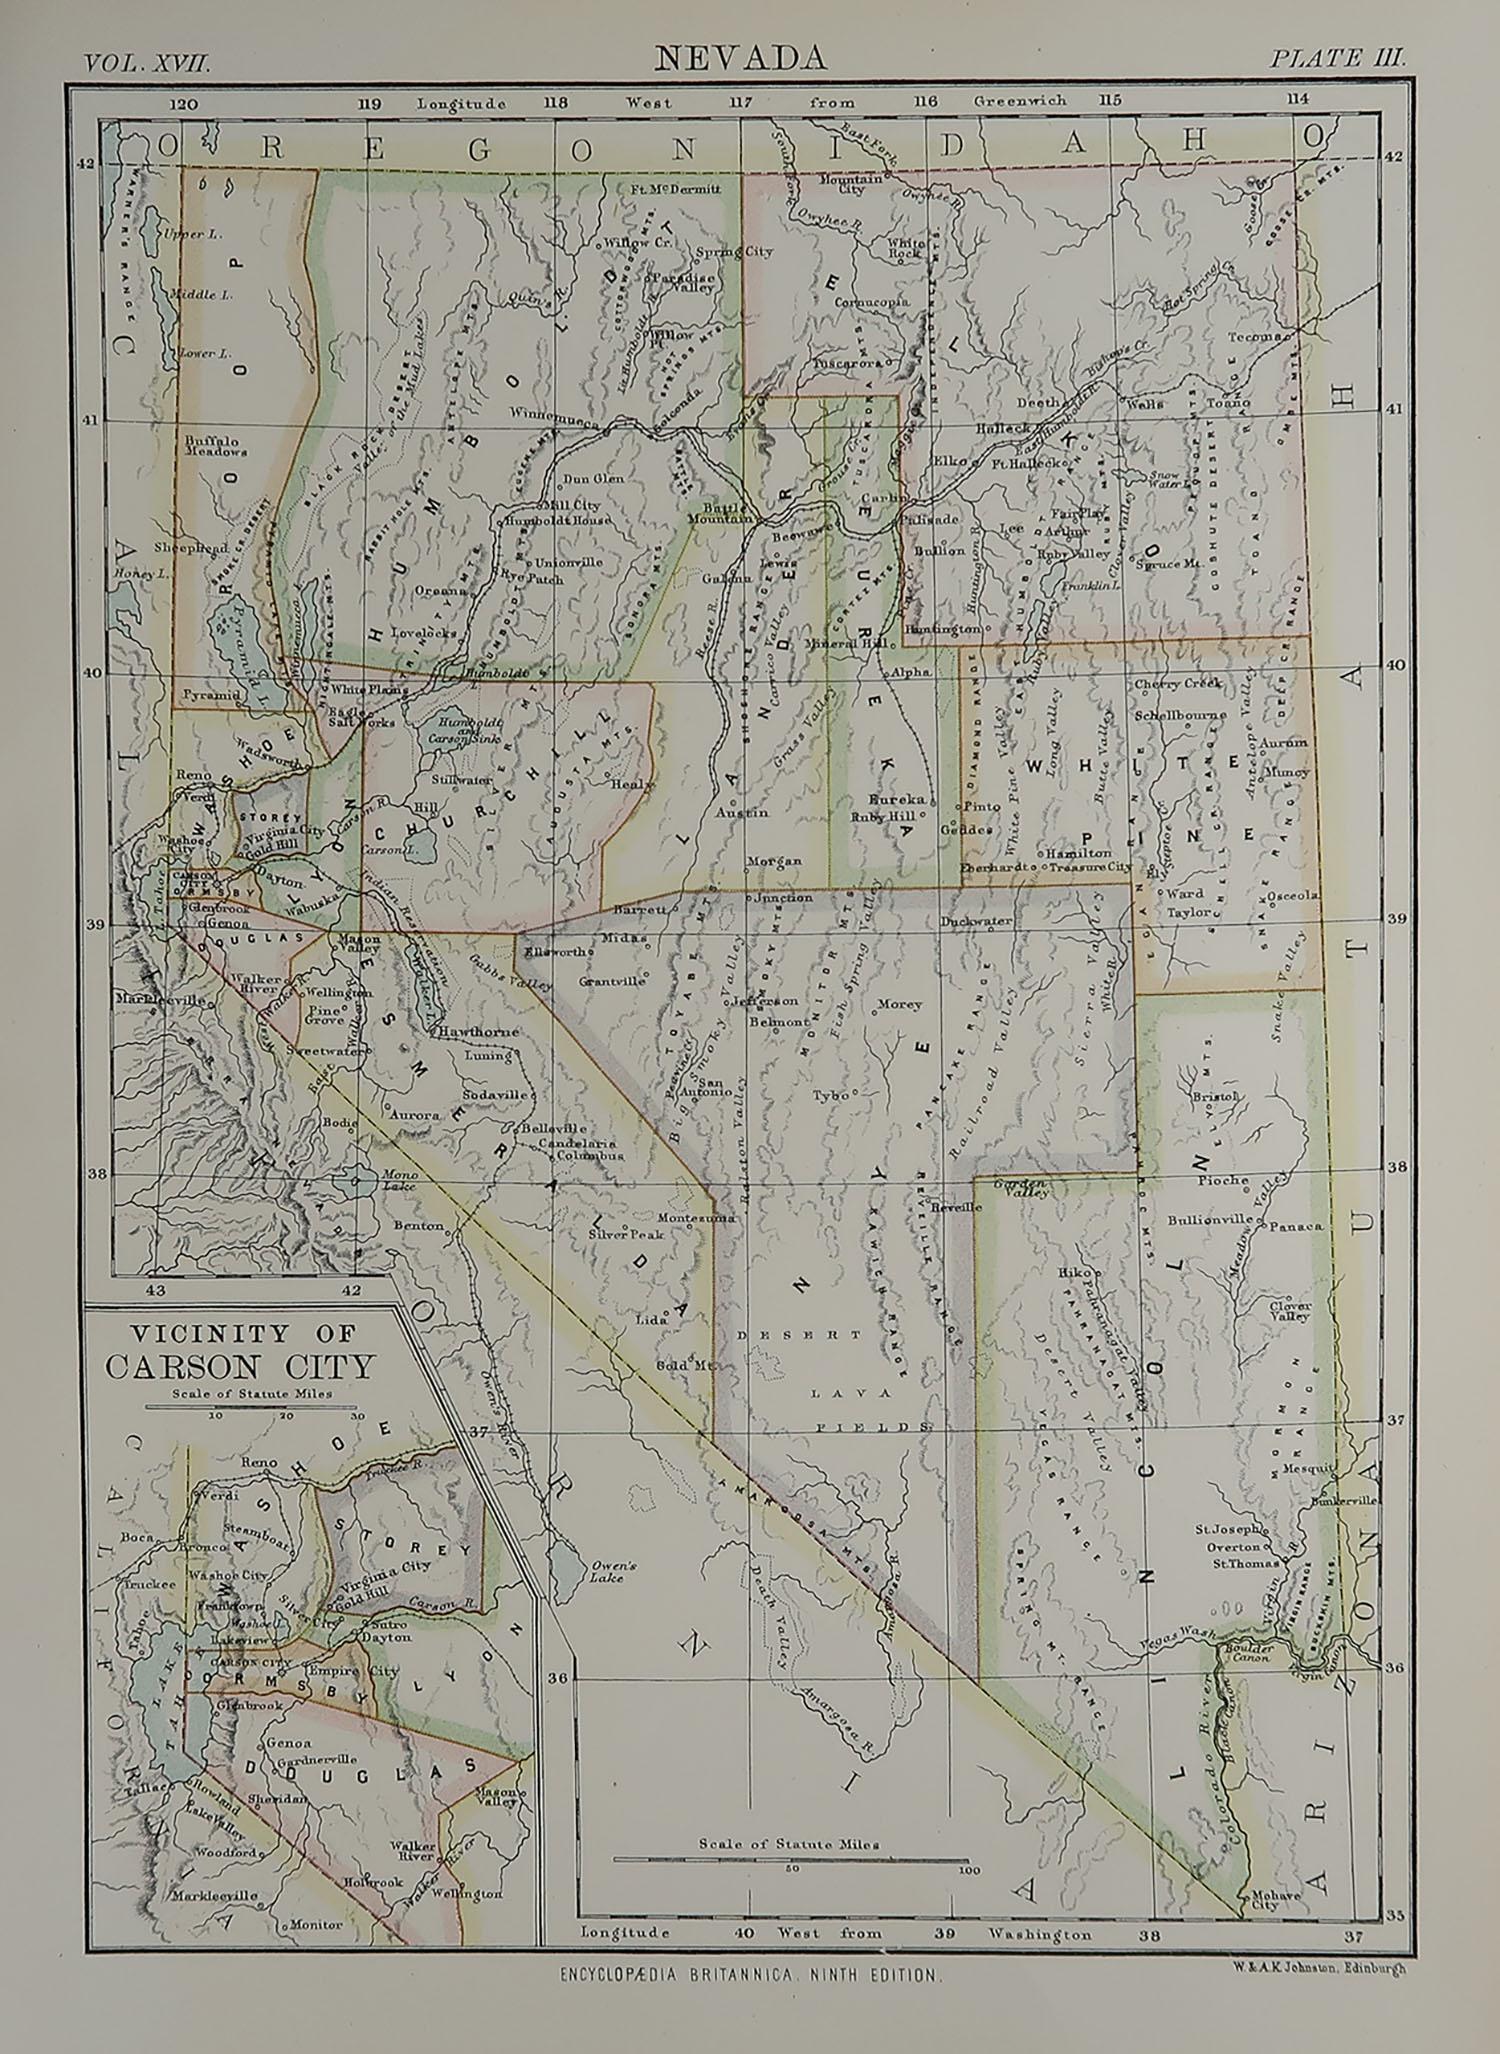 Great map of Nevada

Drawn and Engraved by W. & A.K. Johnston

Published By A & C Black, Edinburgh.

Original colour

Unframed.








